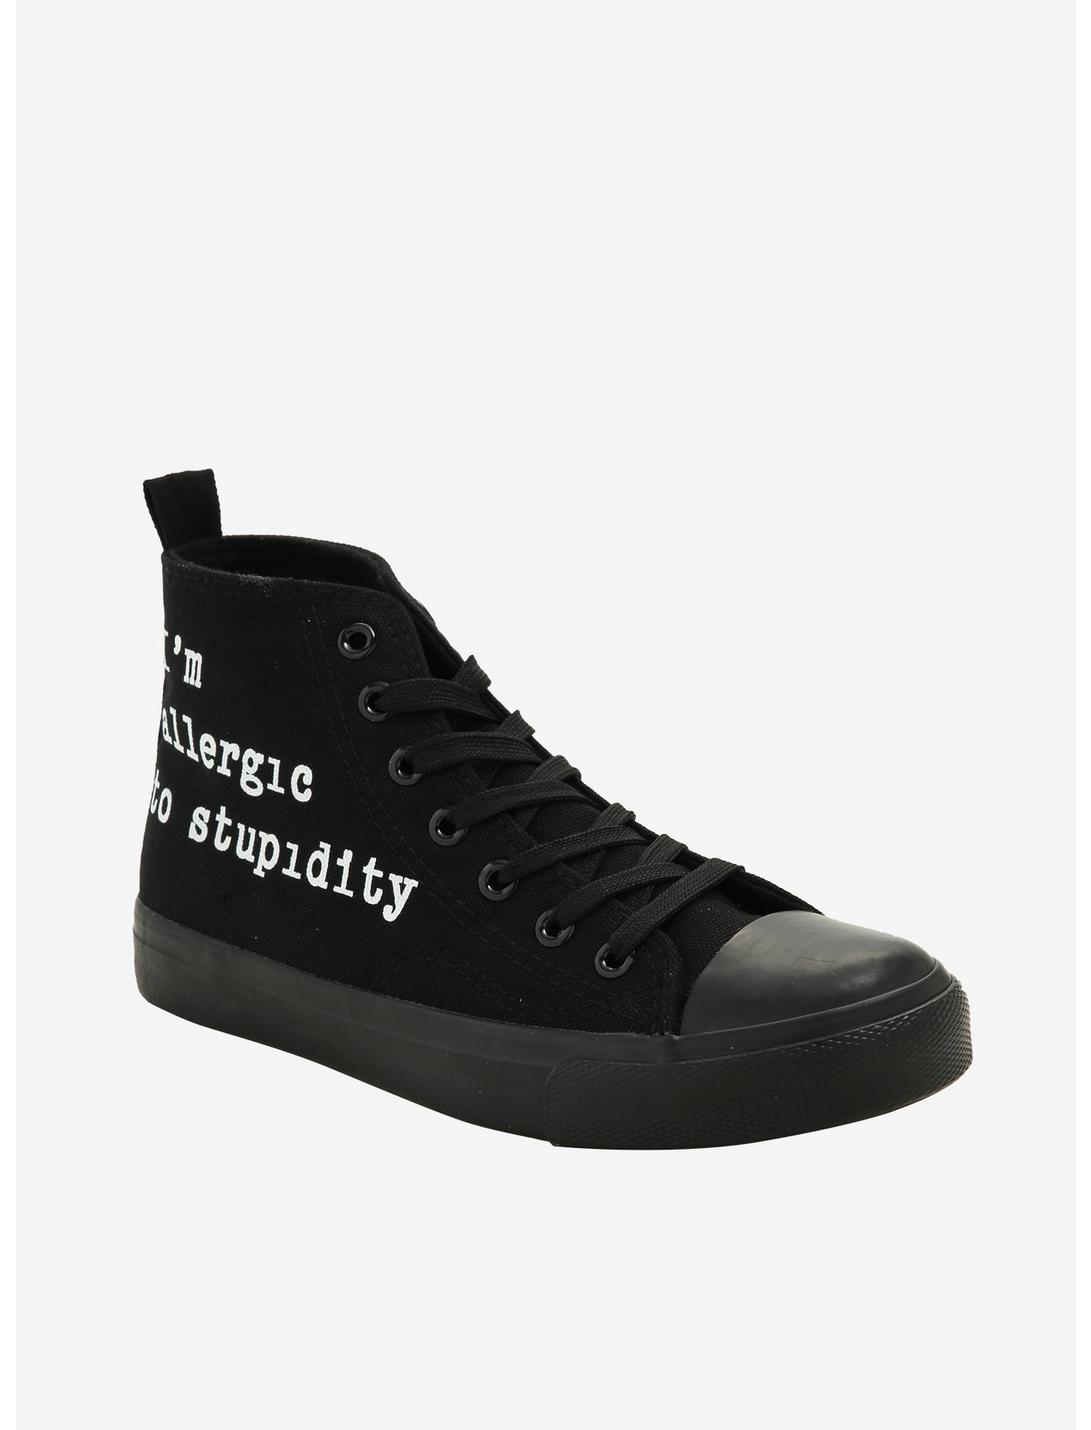 Allergic To Stupidity Hi-Top Sneakers, WHITE, hi-res